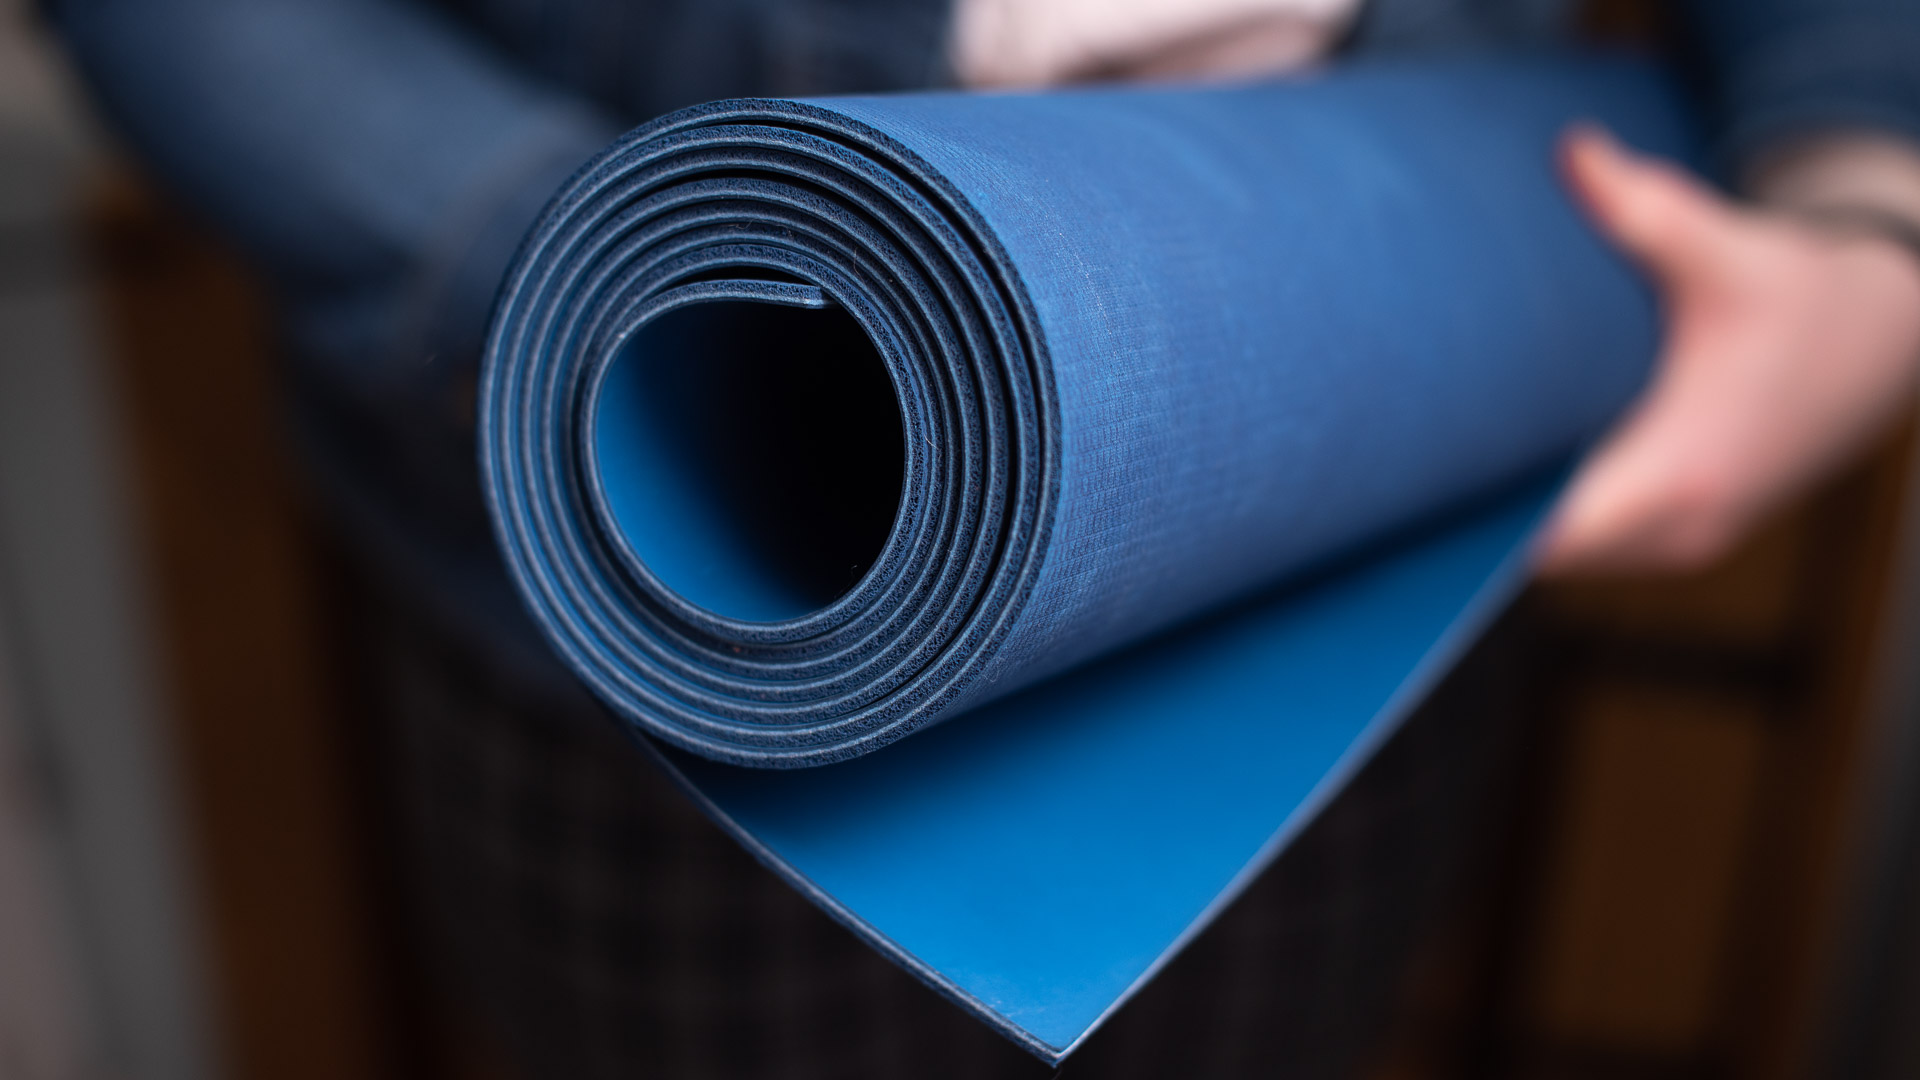 The Yogi Review: Travel Yoga Mats Compared –